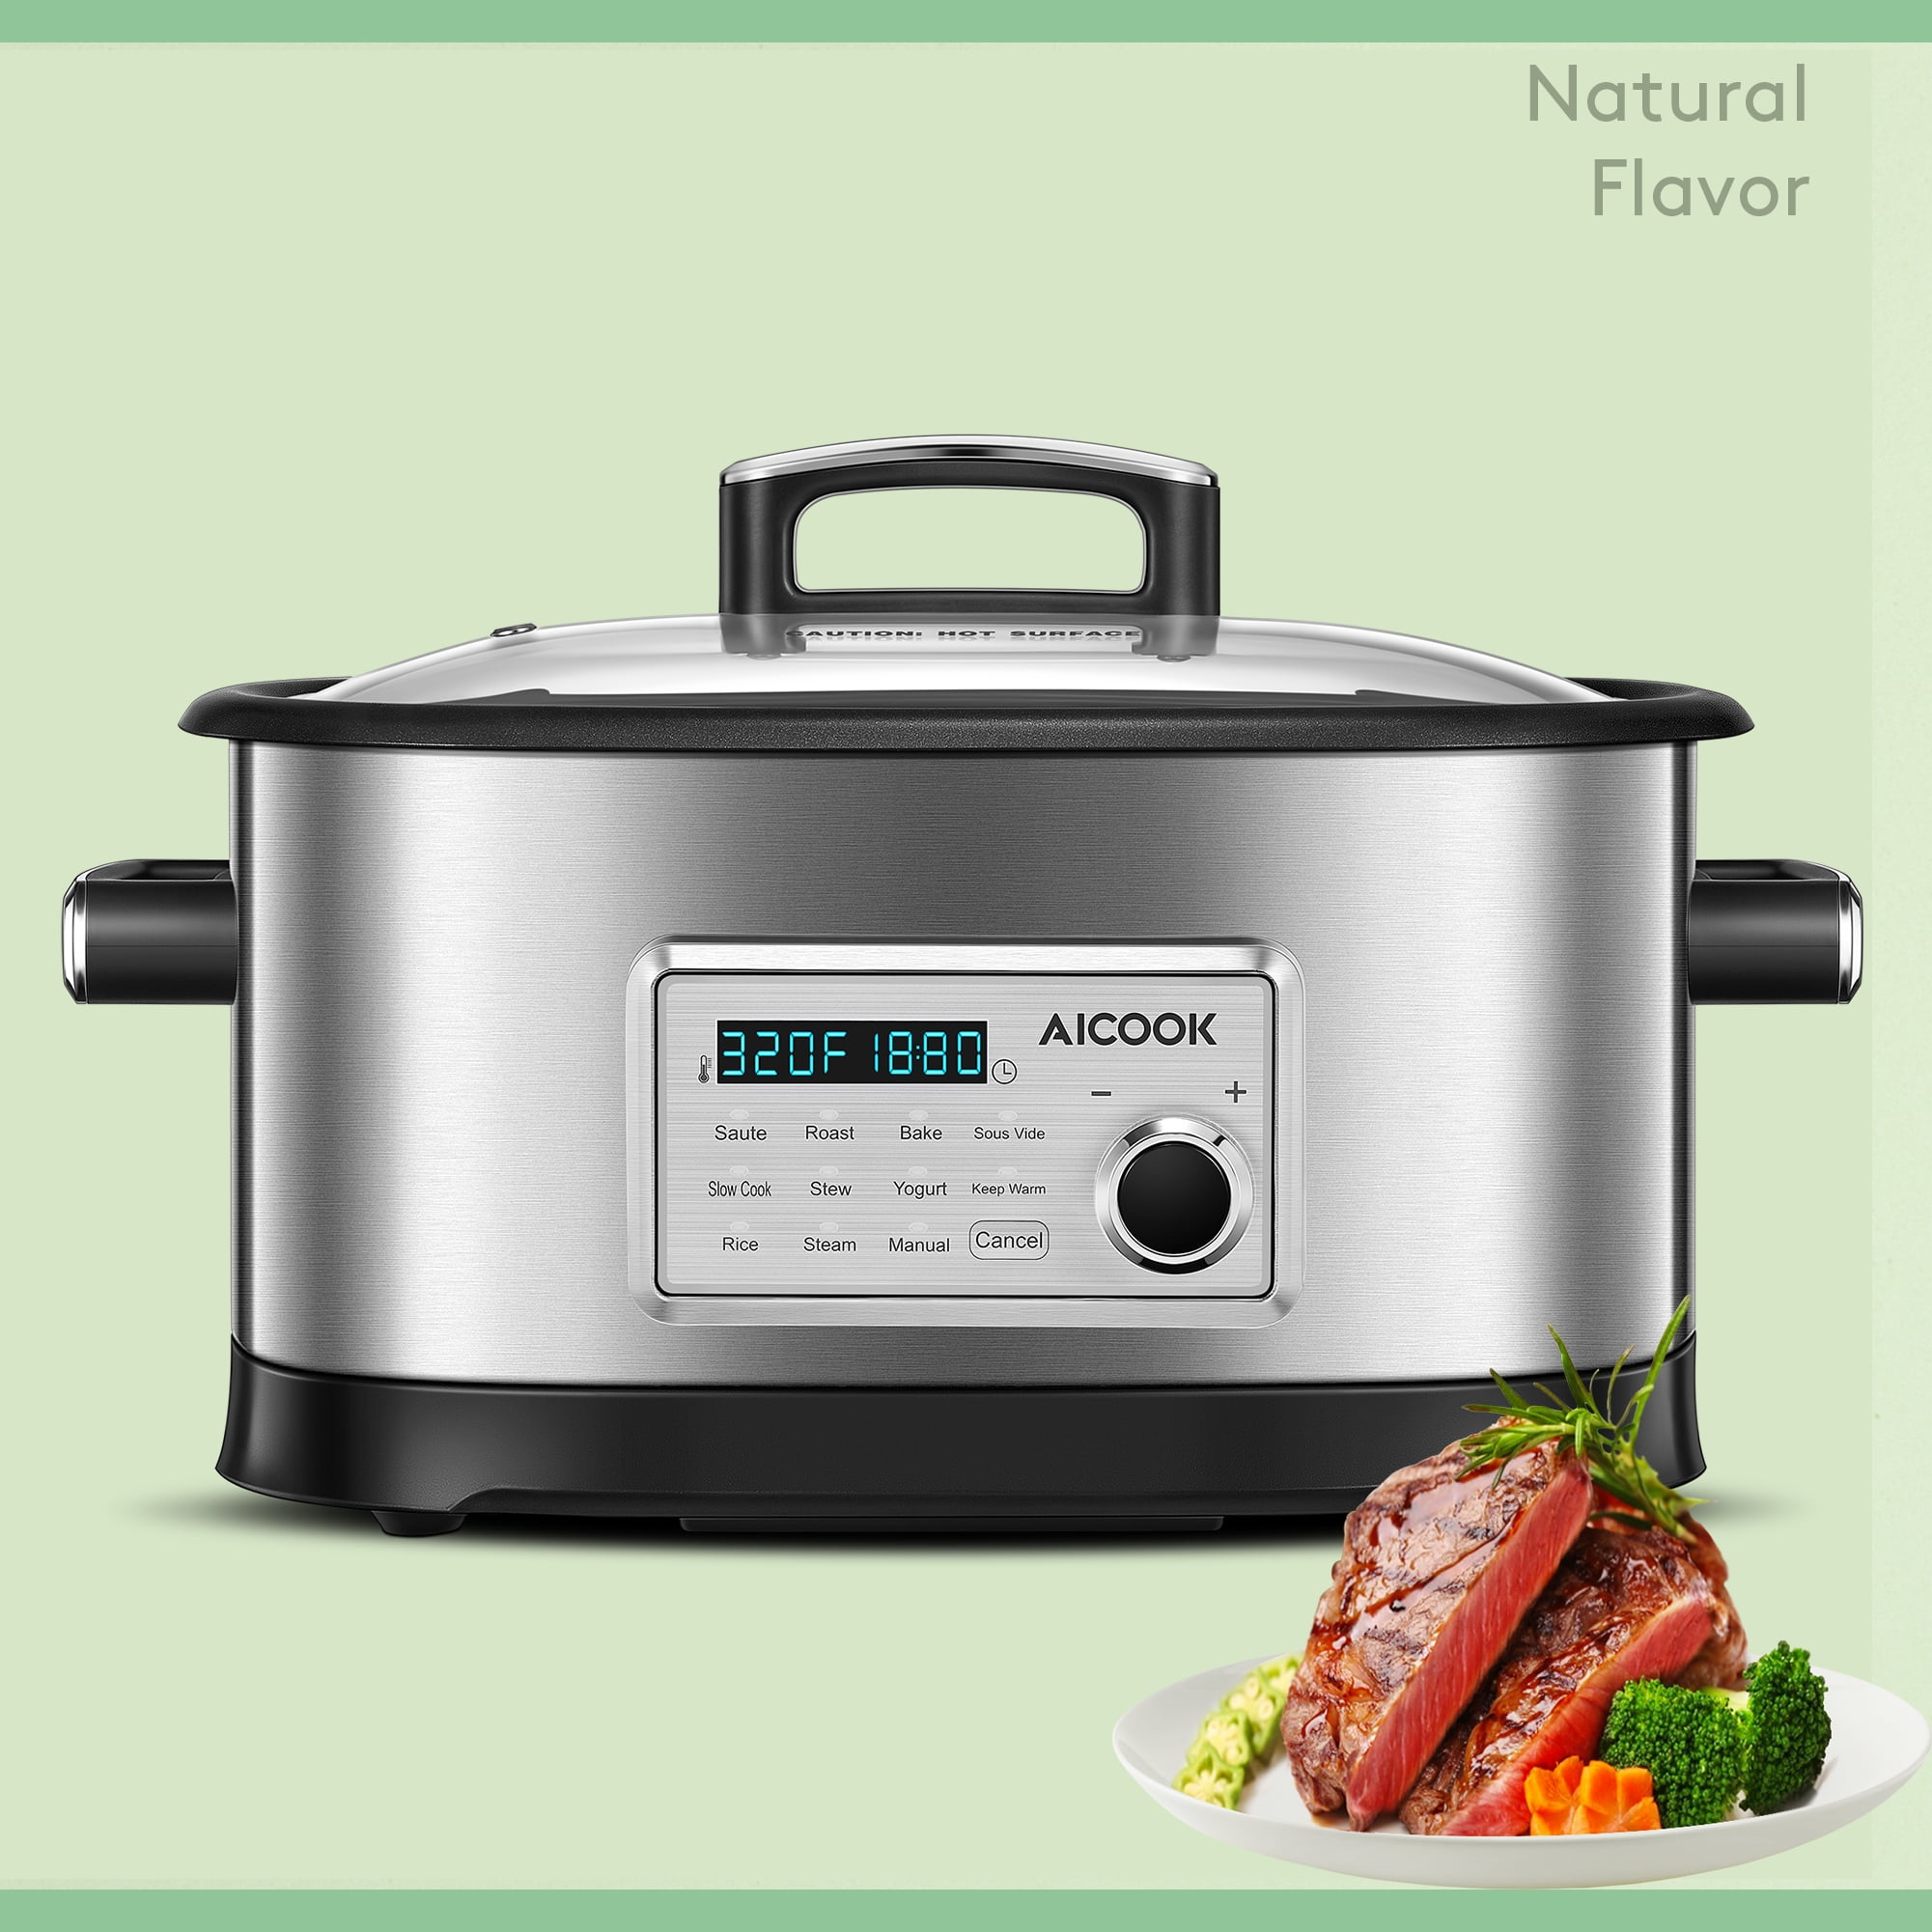 10 quarter programmable slow cooker to buy｜TikTok Search